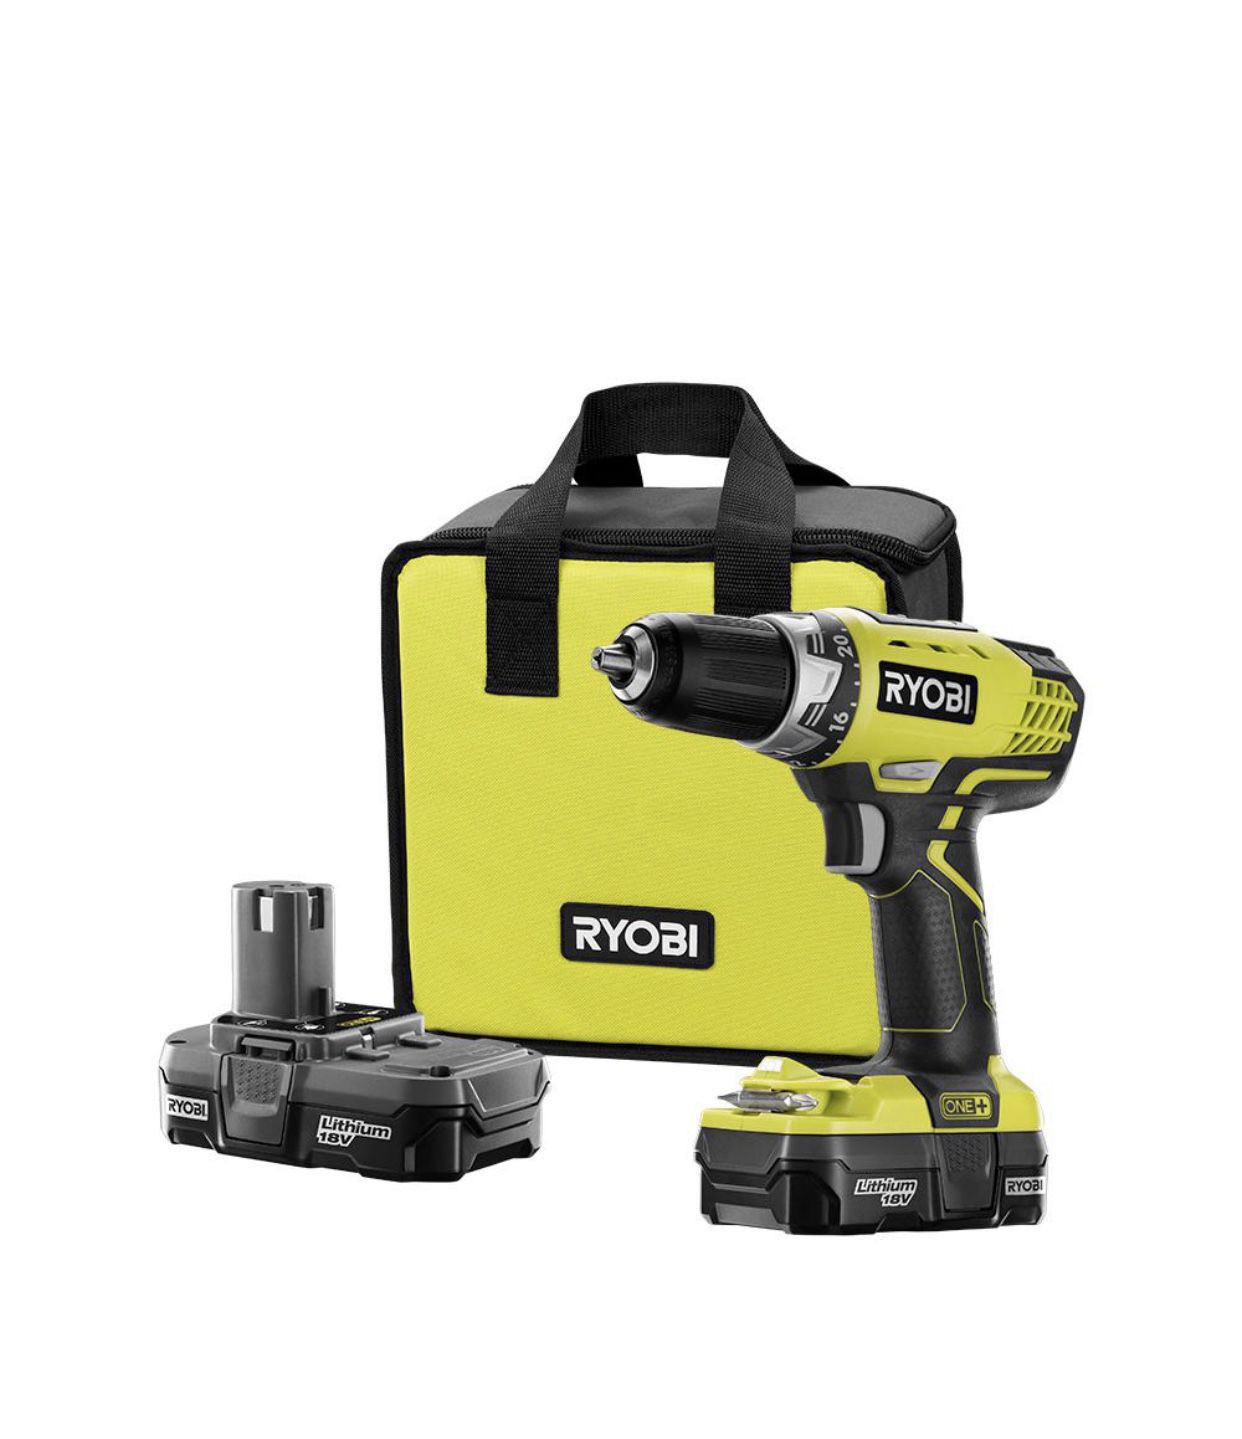 RYOBI 18-Volt ONE+ Lithium-Ion Cordless 1/2 in. Compact Drill/Driver Kit with (2) 1.3 Ah Batteries, Charger, and Tool Bag